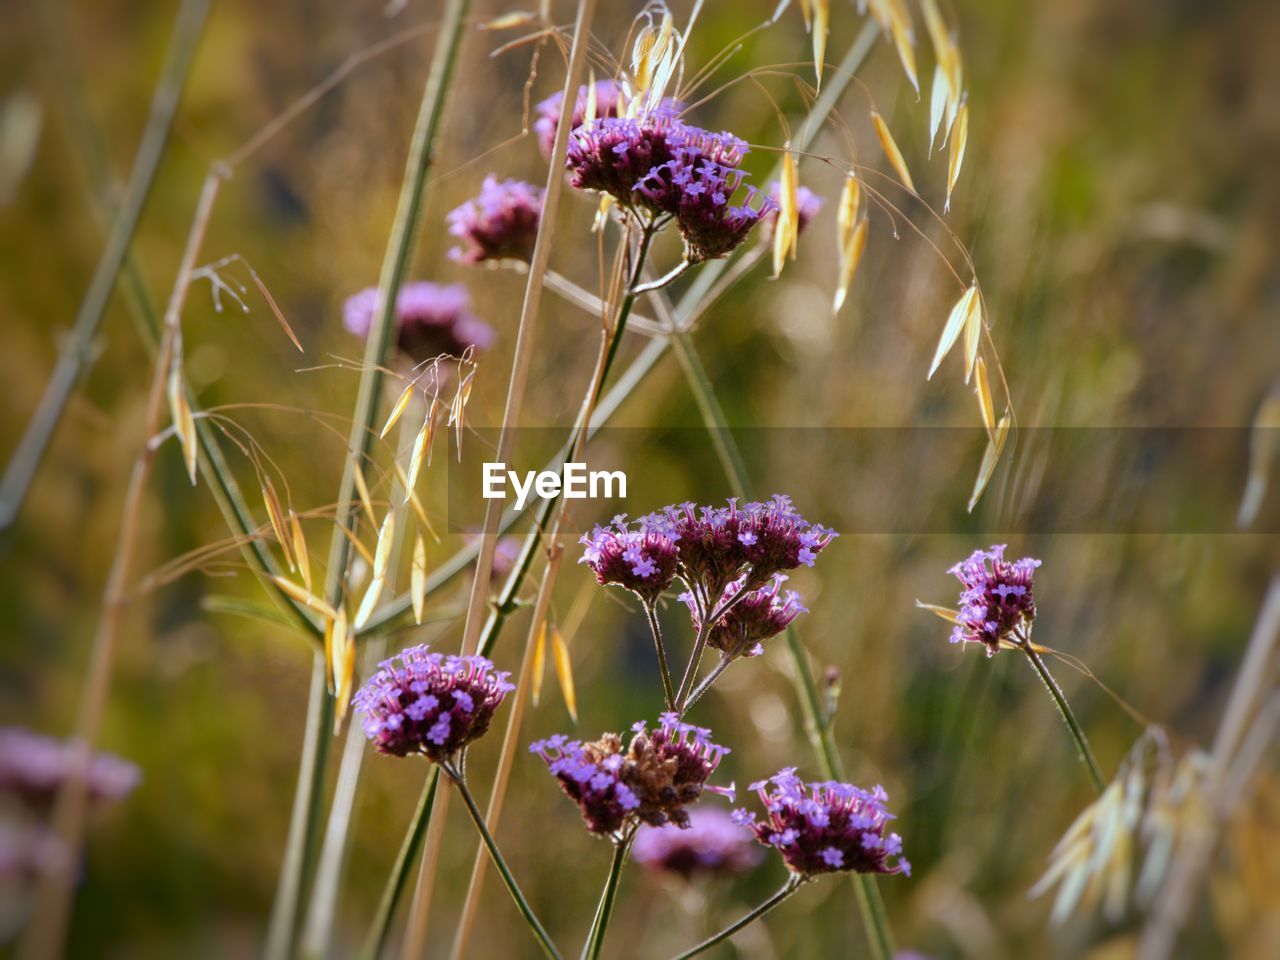 Close-up of purple flowering plant in golden grasses